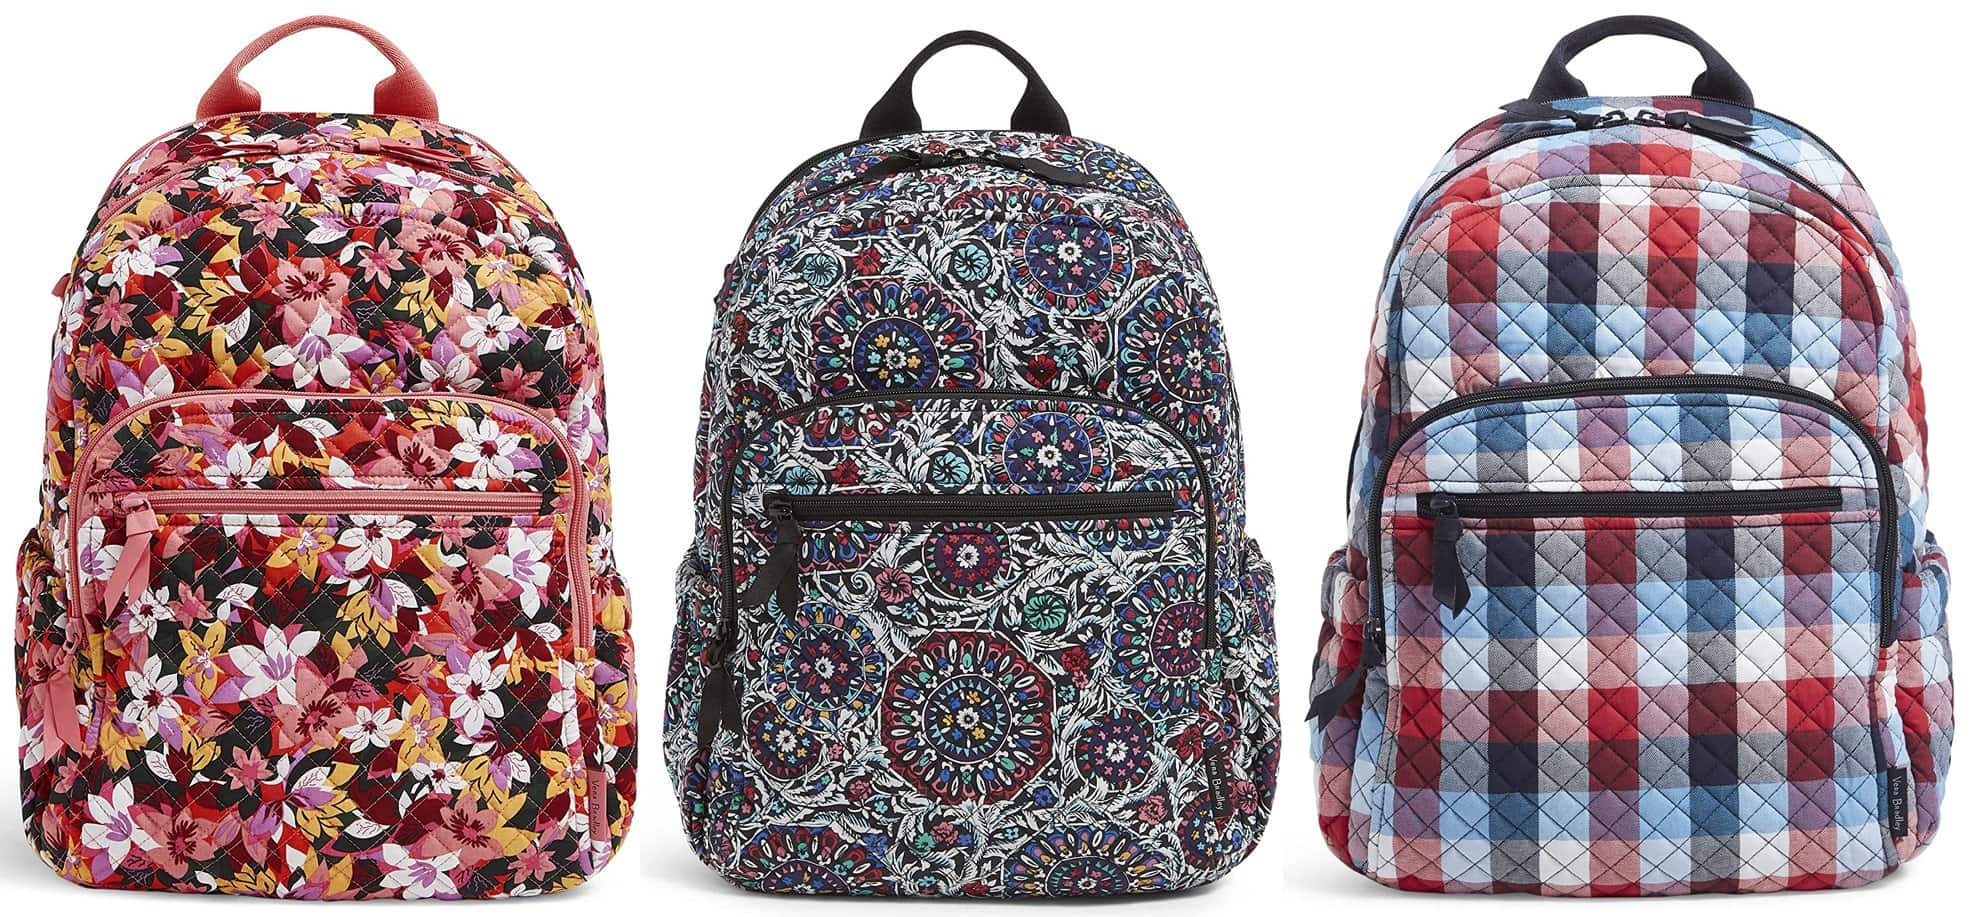 Made of recycled cotton, the Vera Bradley Campus Backpack boasts multiple compartments for all your school essentials and more